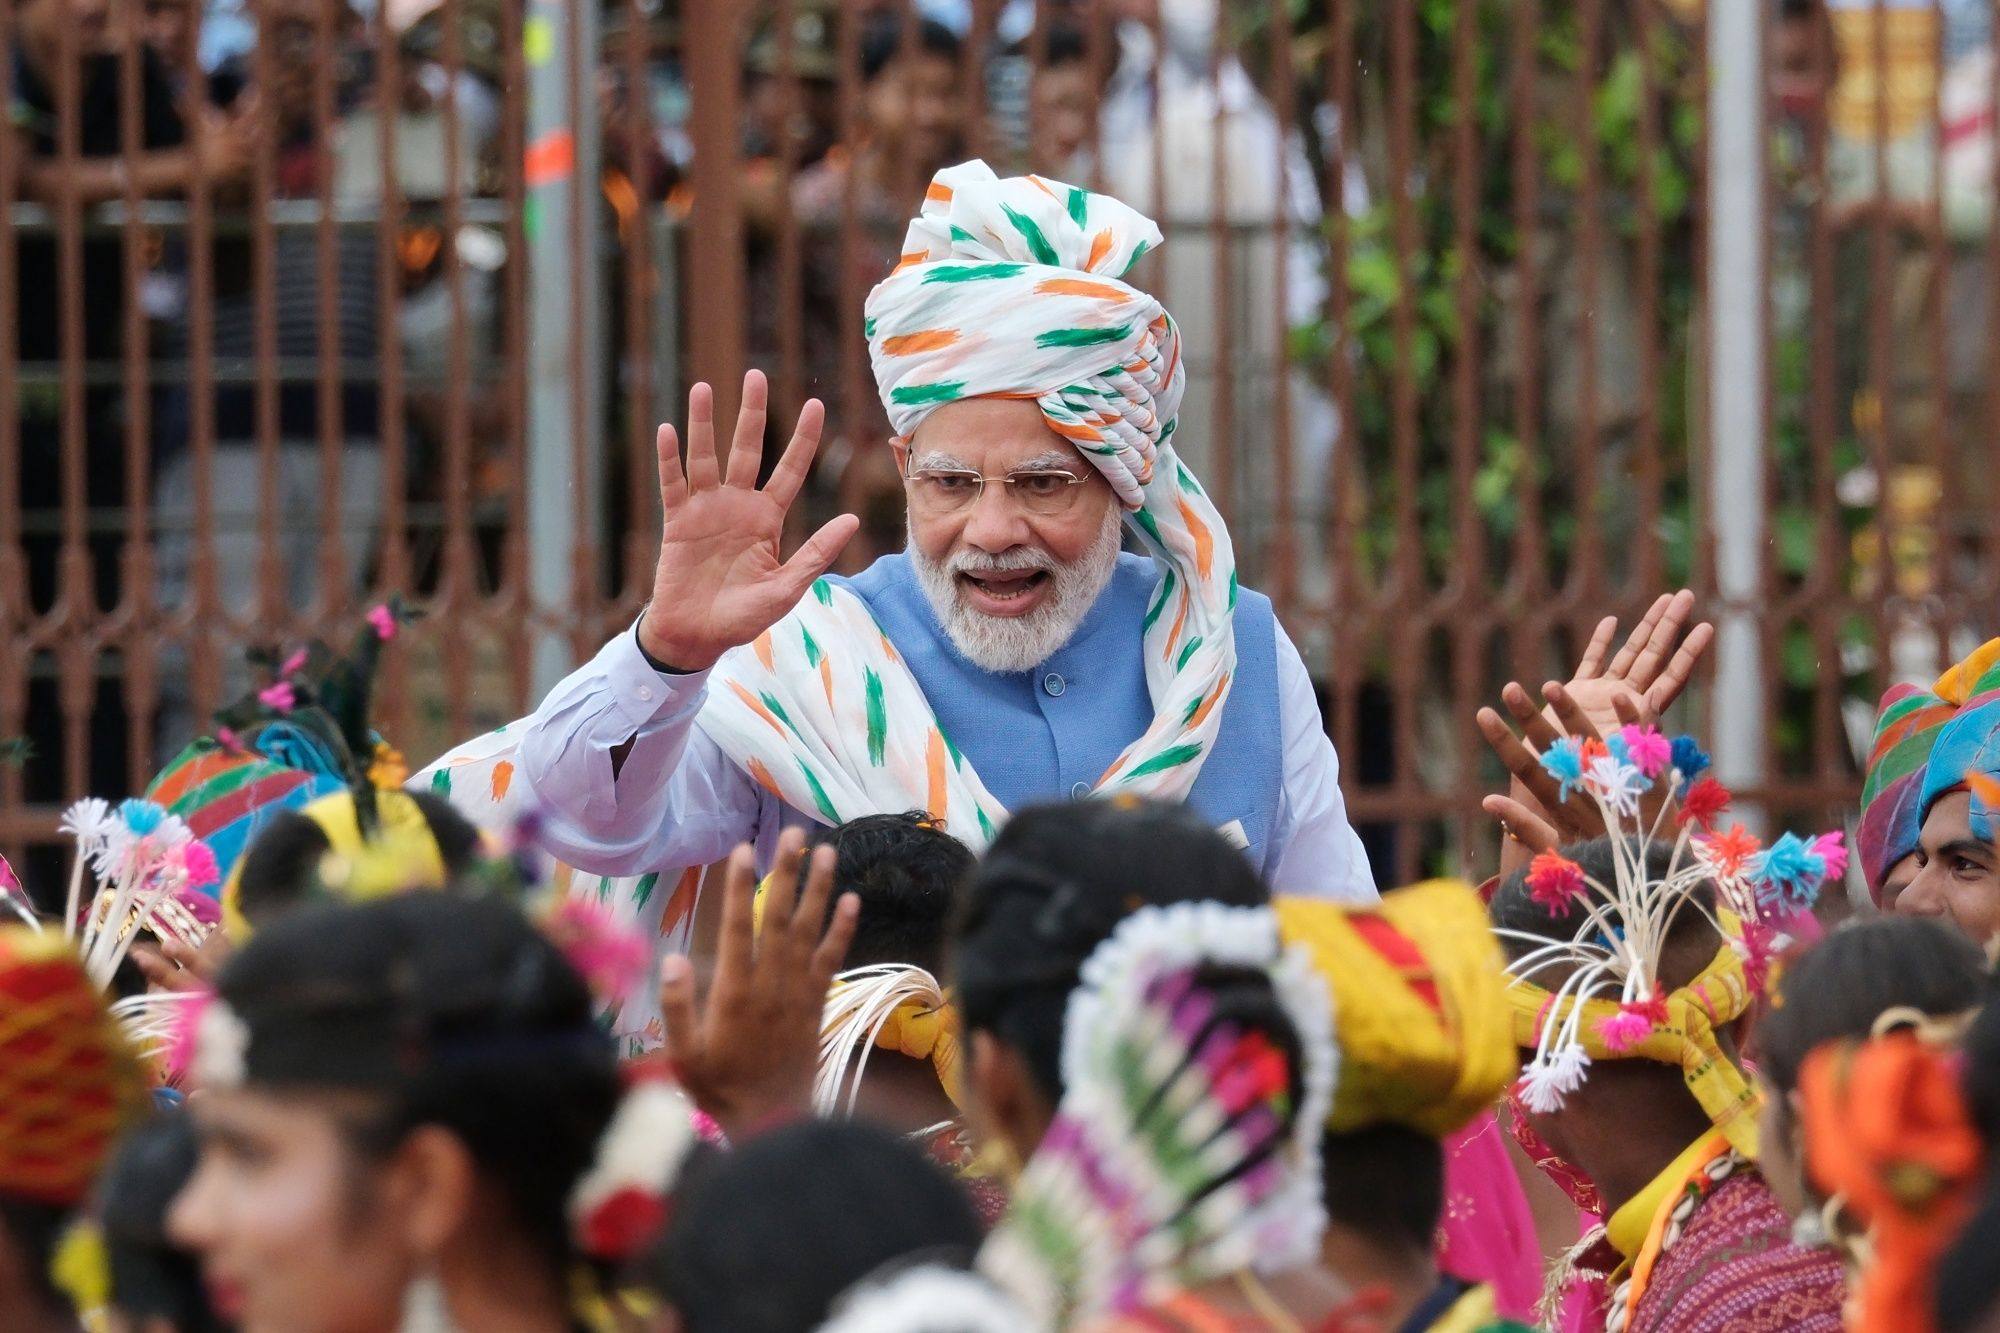 India’s Prime Minister Narendra Modi has said the radio chats are like conversing with “my family about routine issues while sitting at home”. Photo: Bloomberg